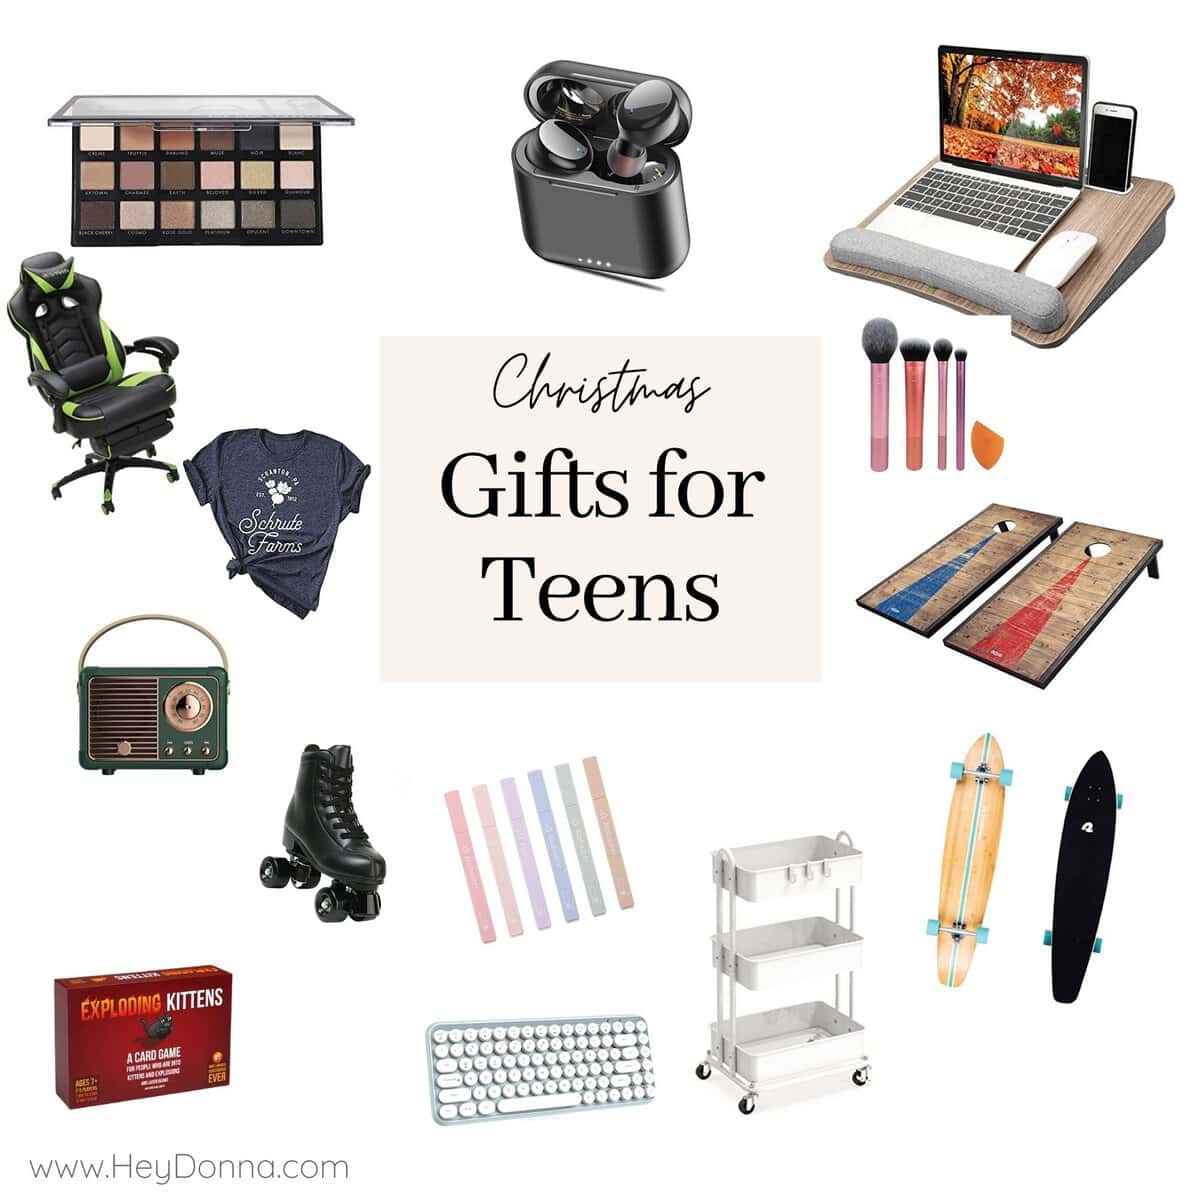 Stocking Stuffer Ideas For Mom - Small Gifts She Will Love! [UPDATED 2023]  - Hey Donna